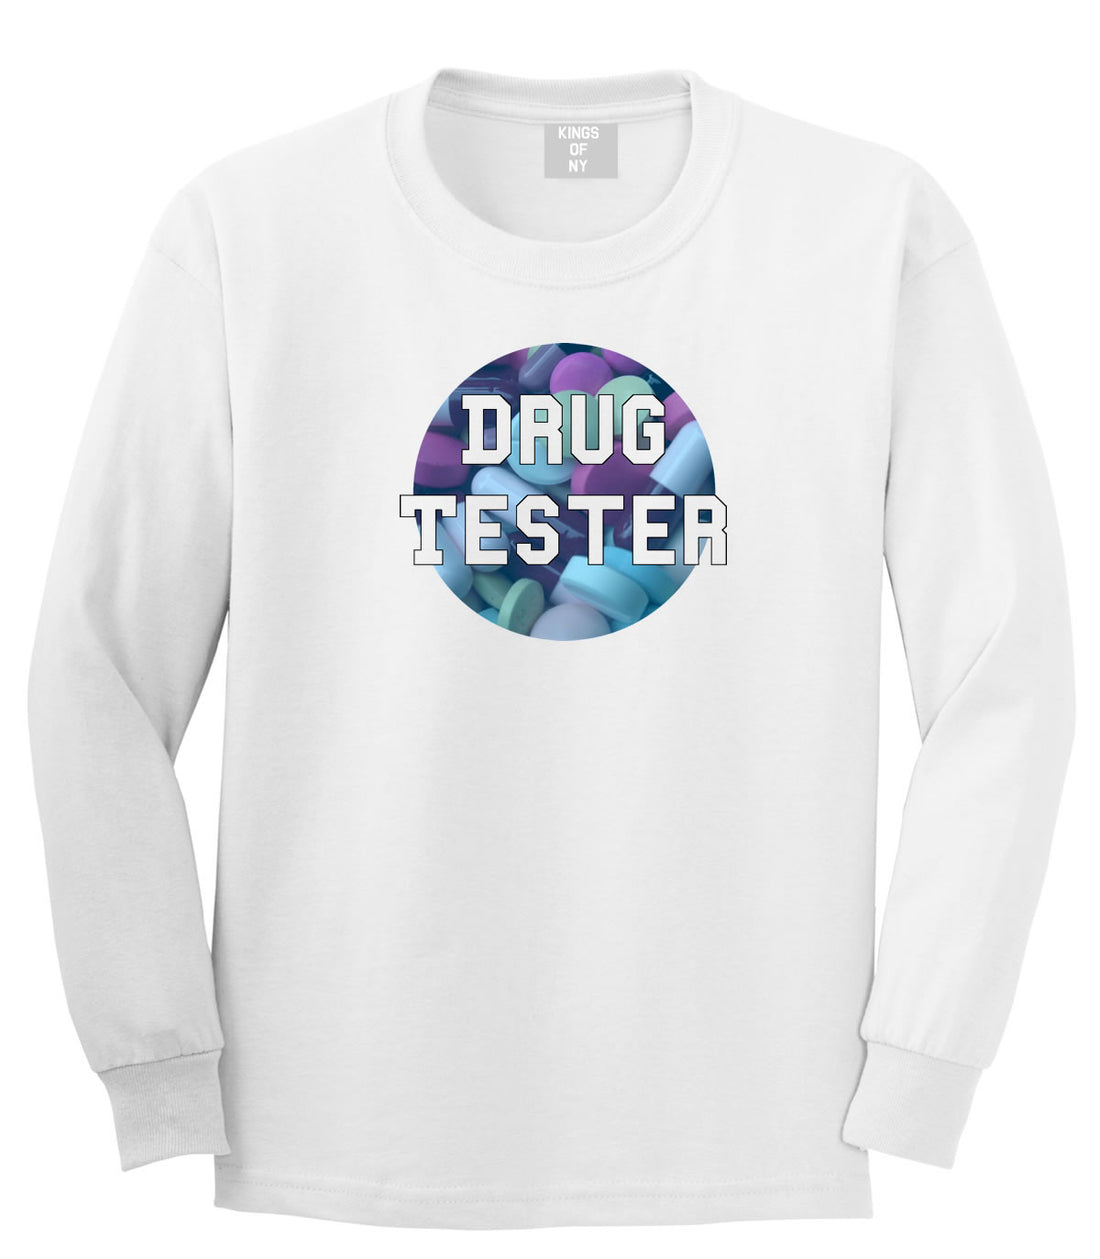 Drug tester weed smoking funny college Long Sleeve Boys Kids T-Shirt in White by Kings Of NY